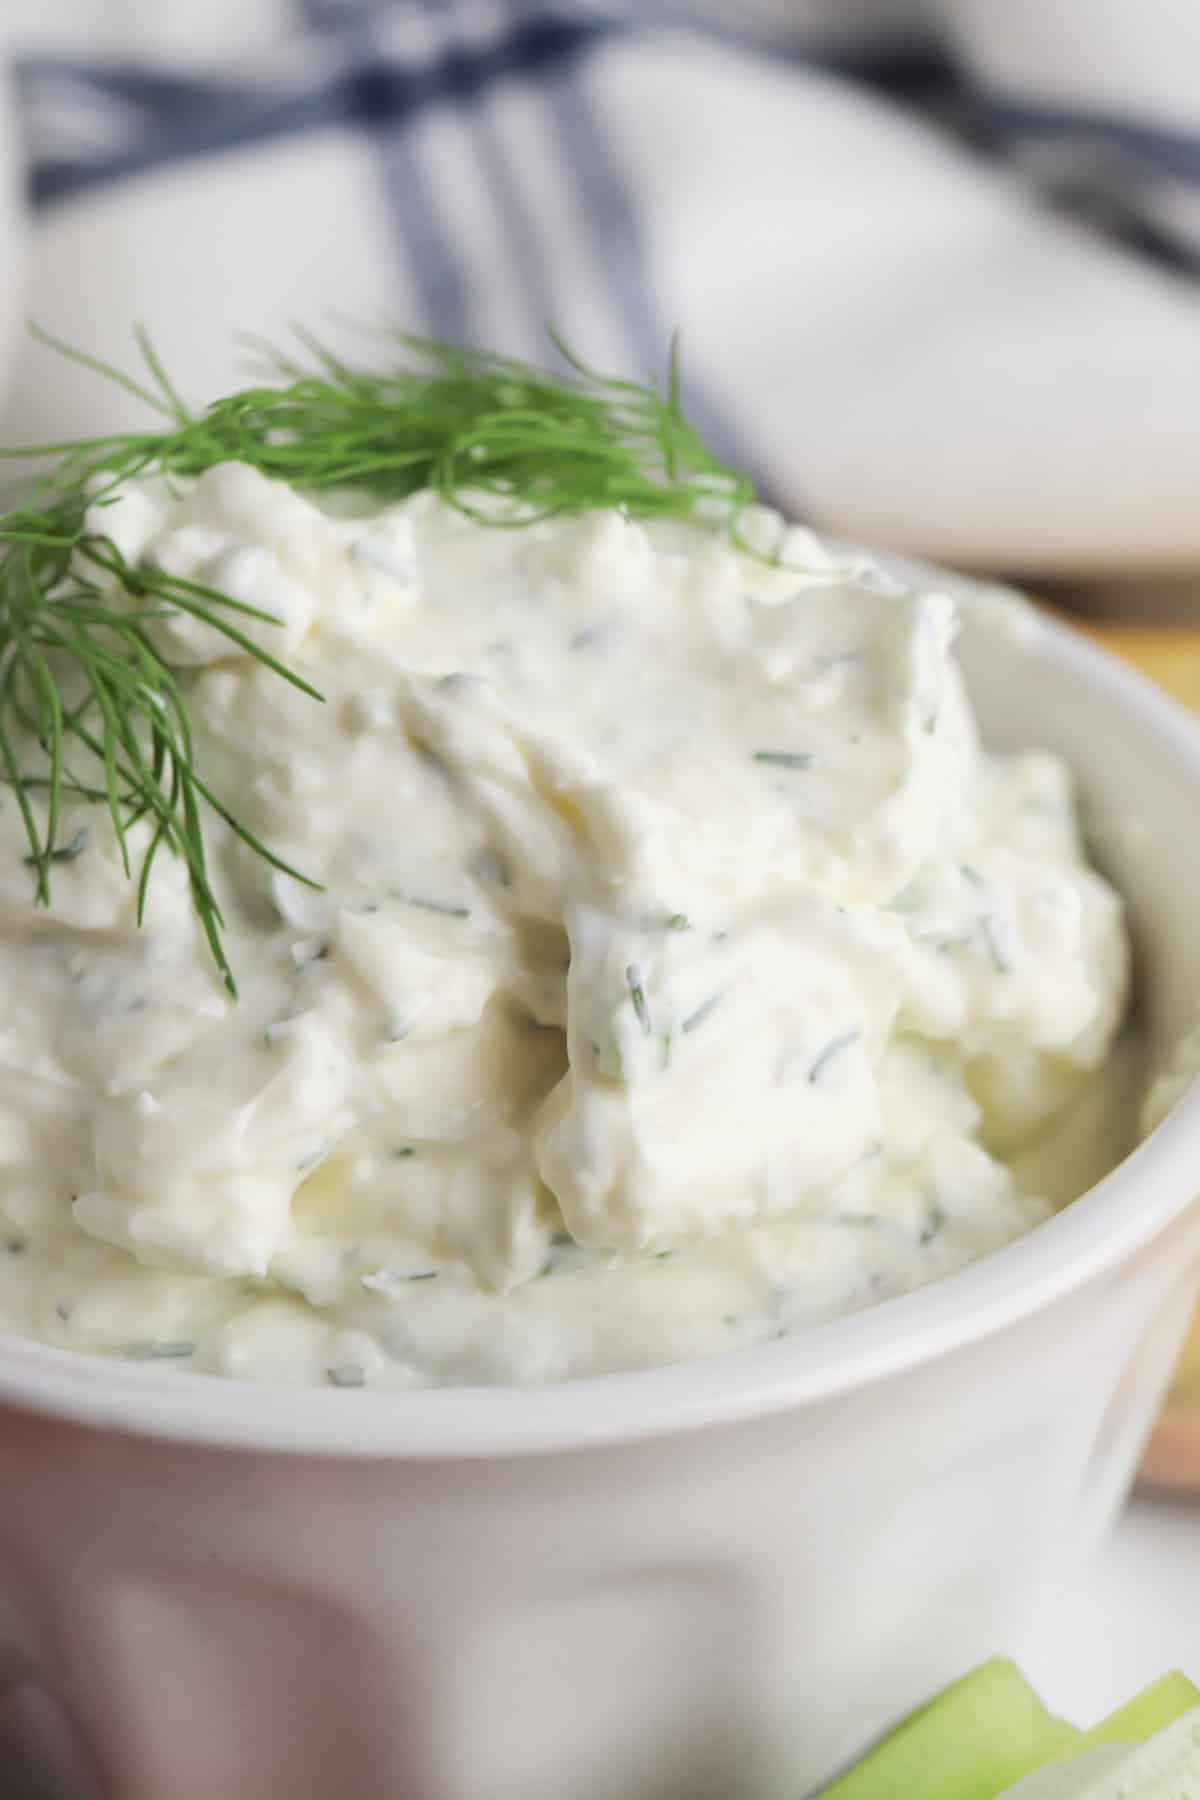 Creamy dill dip made with cream cheese, sour cream, fresh dill, green onions, and seasonings.